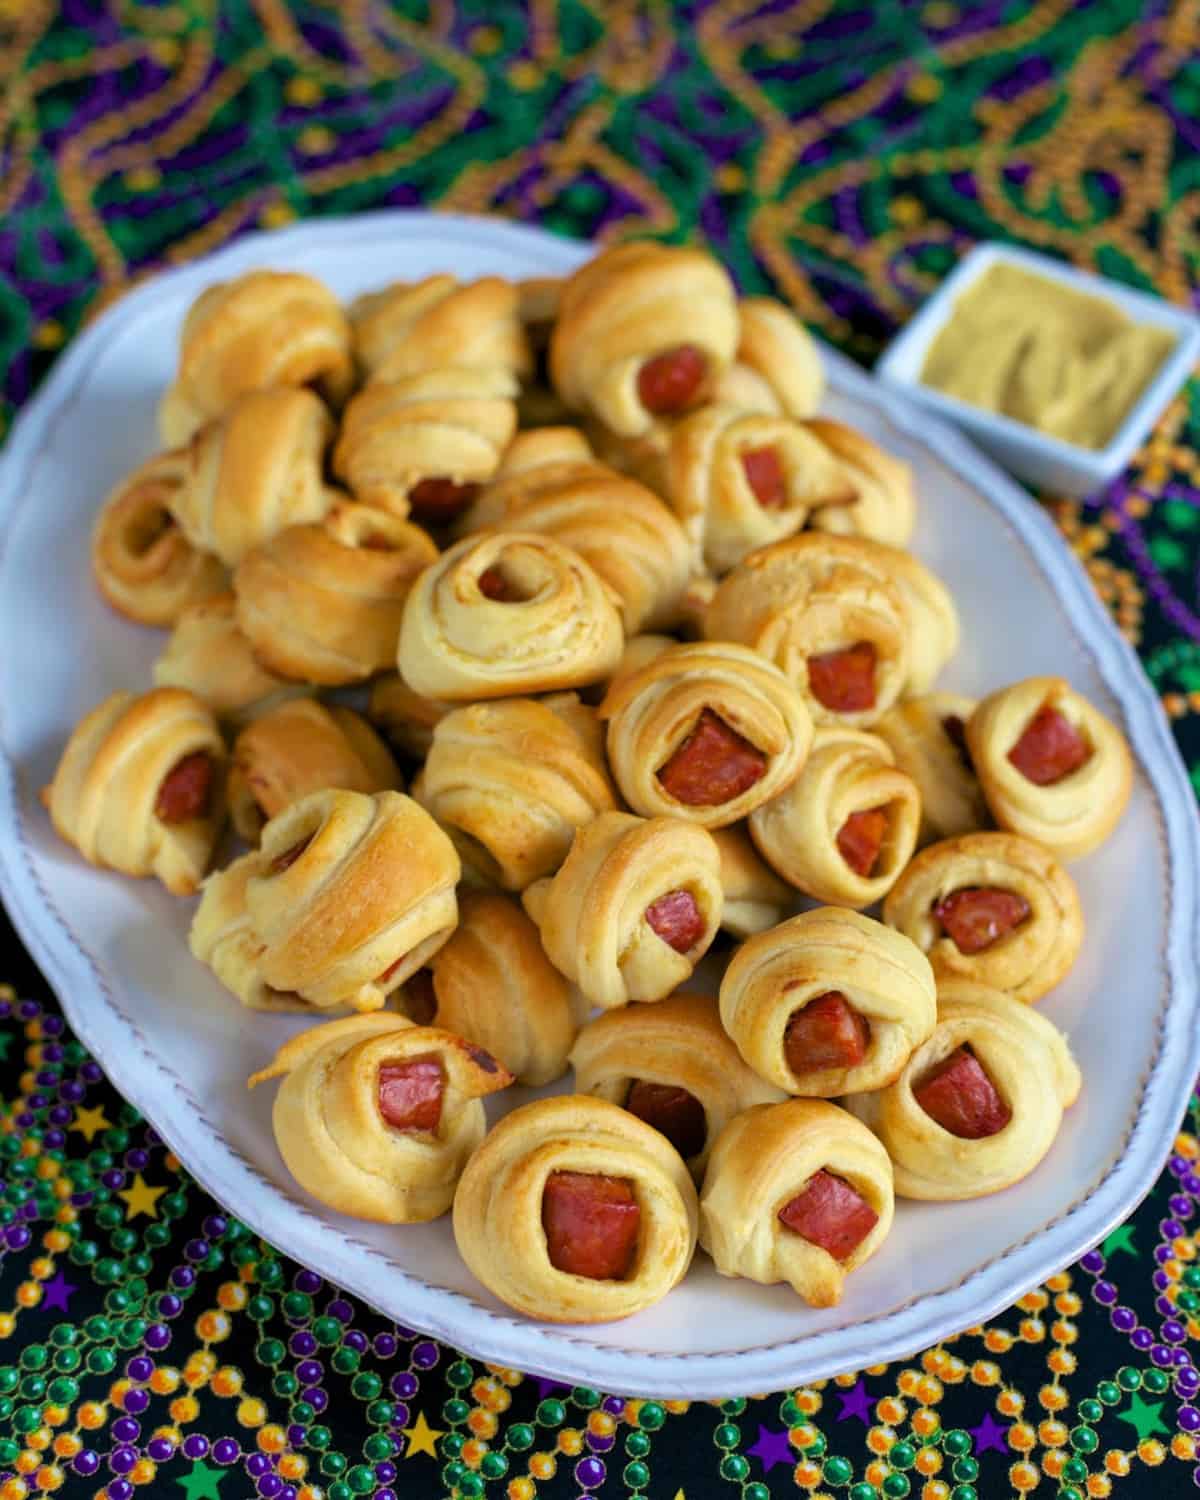 Andouille Pig in a Blanket - kick up ordinary pigs in a blanket with andouille sausage. Only 3 ingredients - andouille, mustard and crescent rolls.